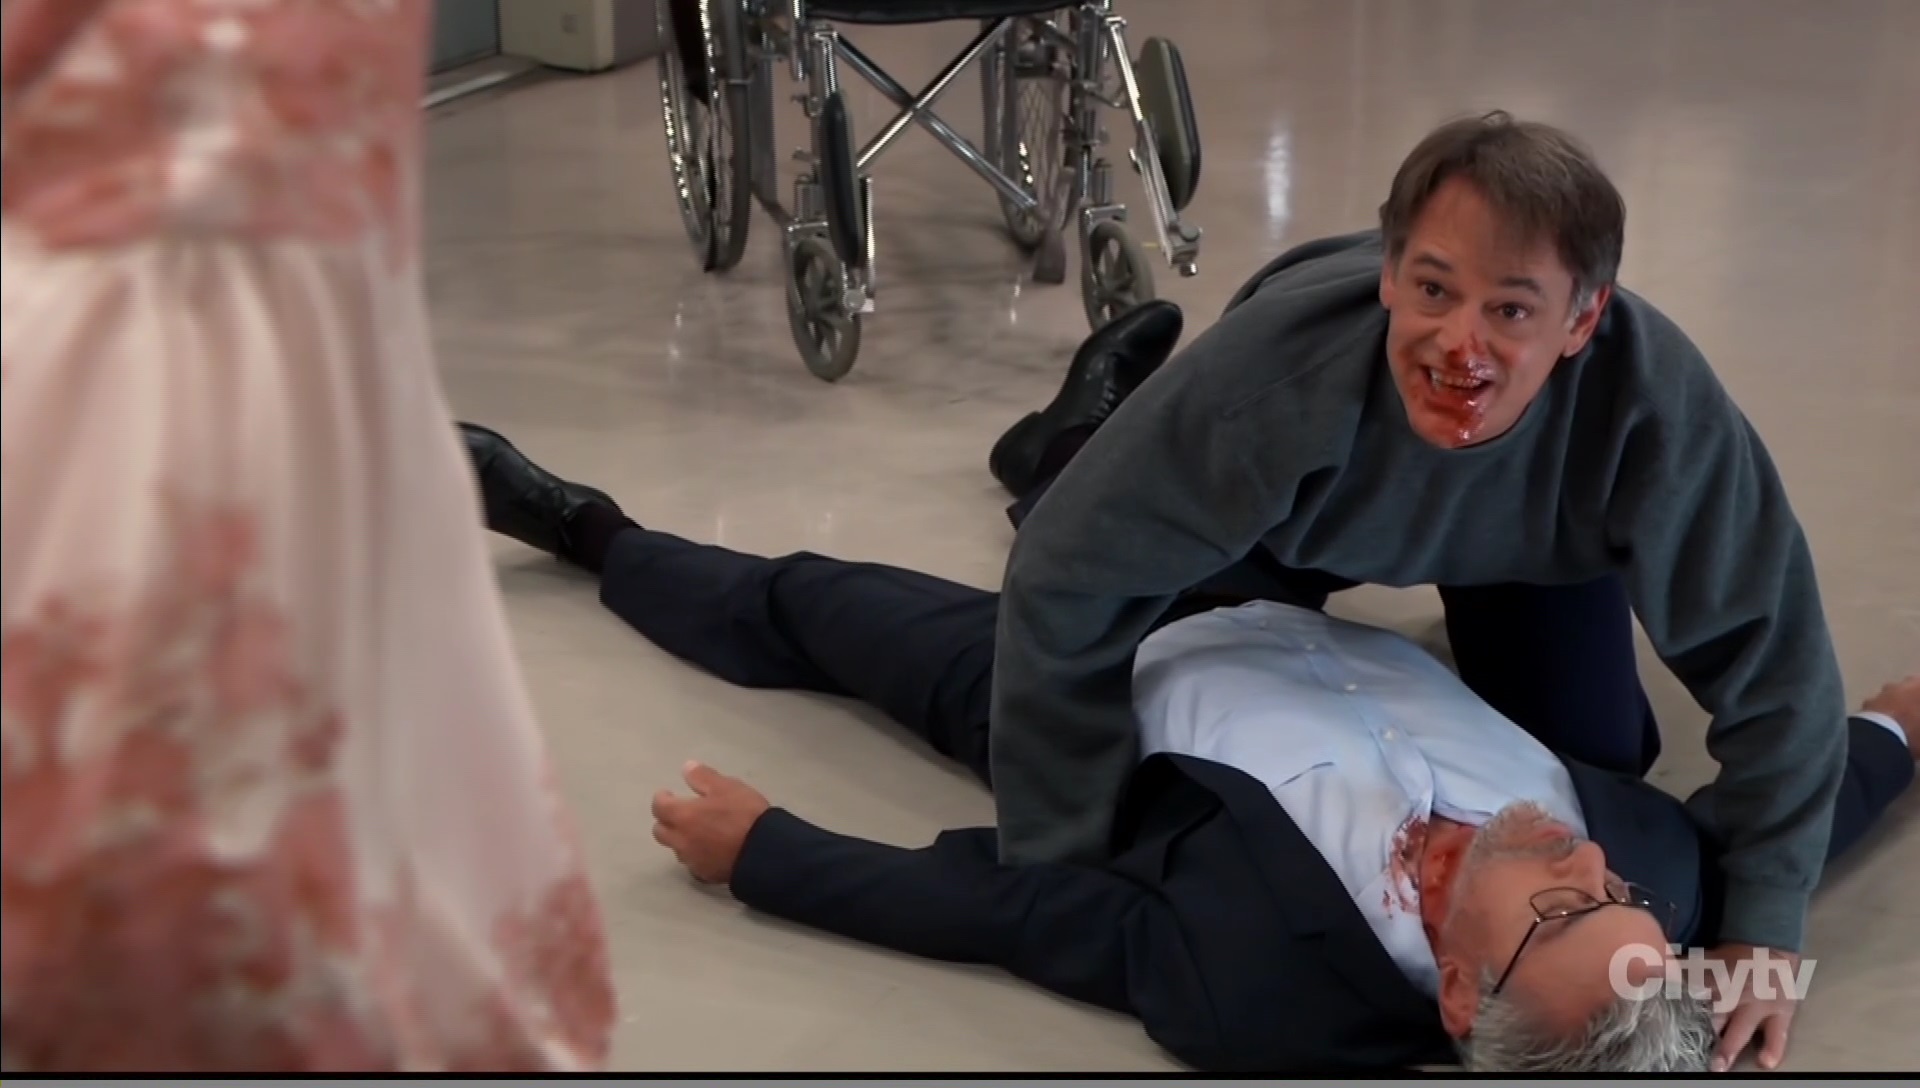 crazy daydream of ryan attacking general hospital